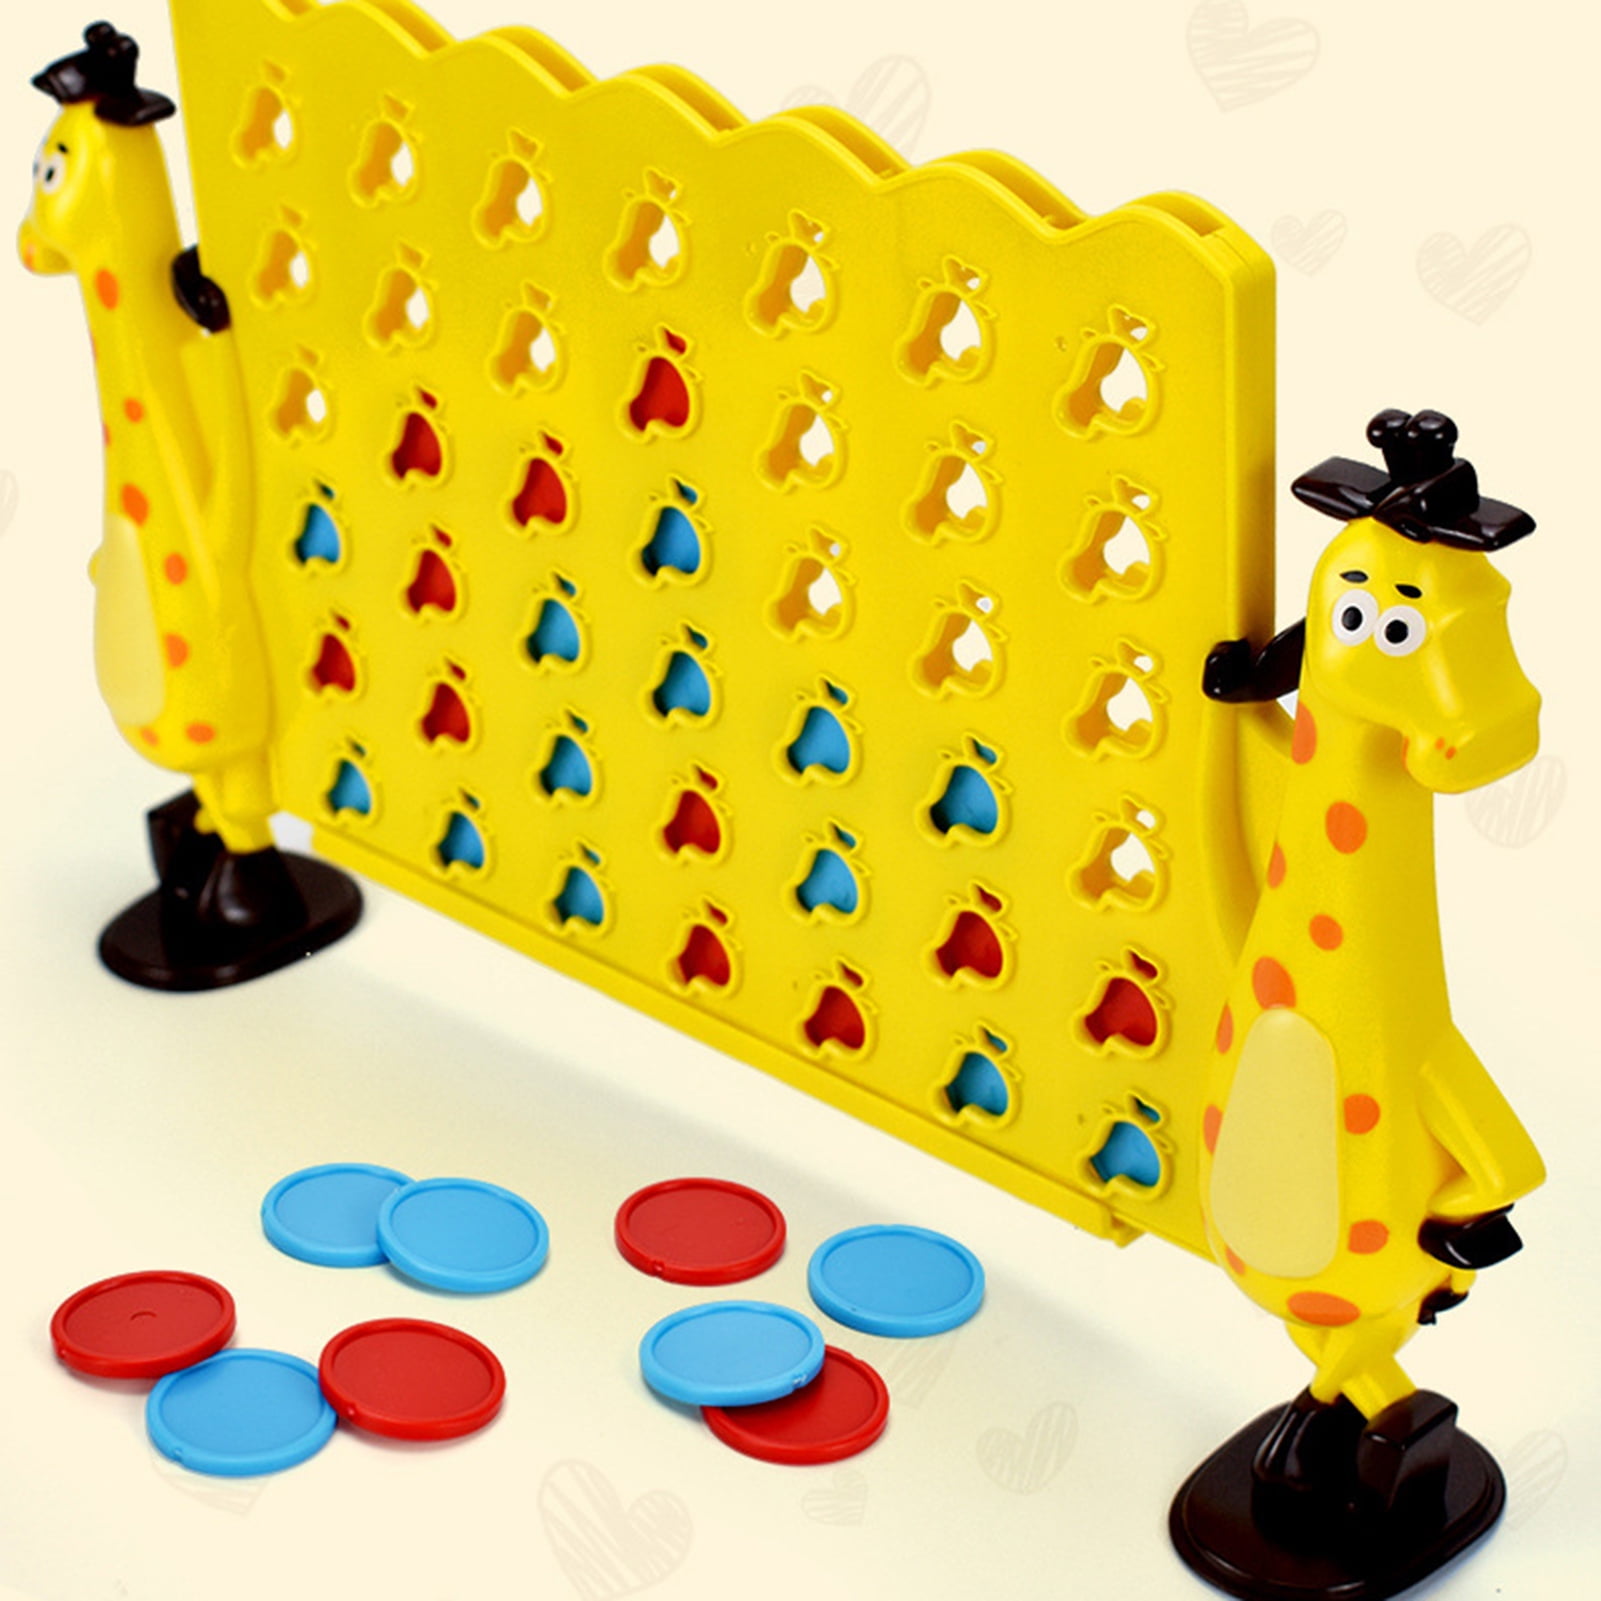 Details about   Line Up 4 Connect Four Traditional Family Kids Classic Board Game Toy Gift Funn 